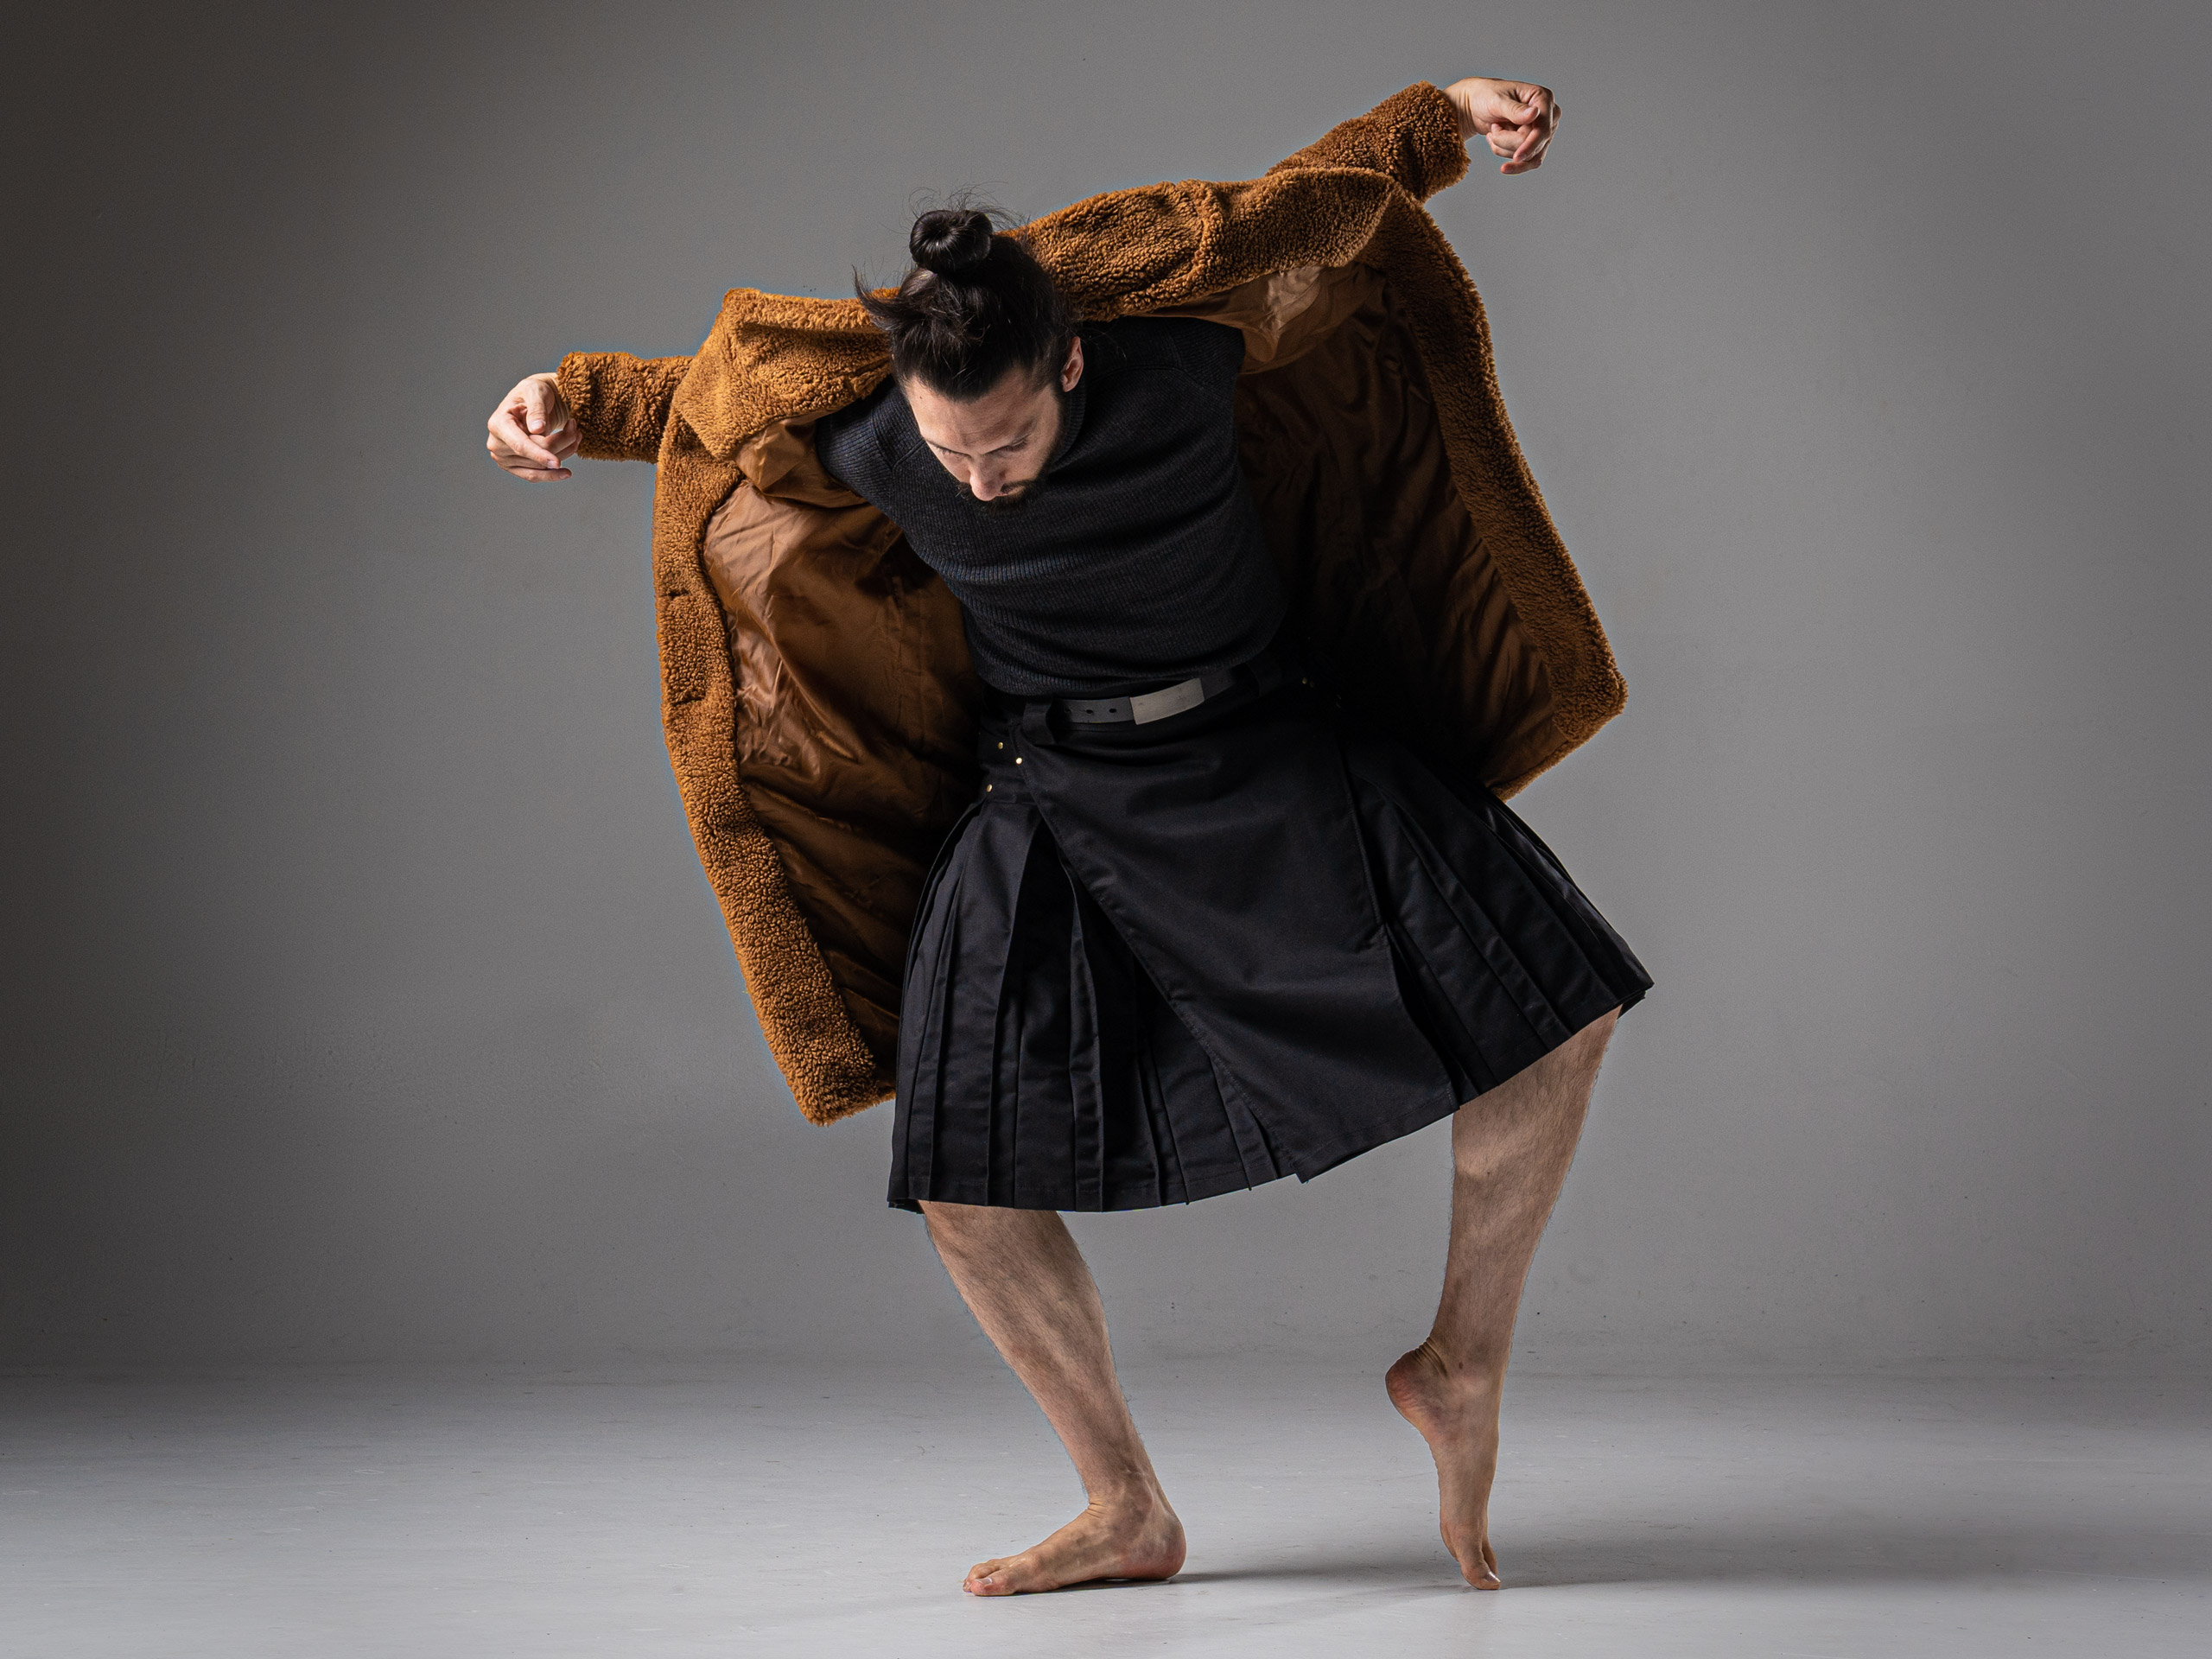 push/FOLD composer-choreographer Samuel Hobbs in a brown furry jacket and kilt holding a delicate and contorted pose.